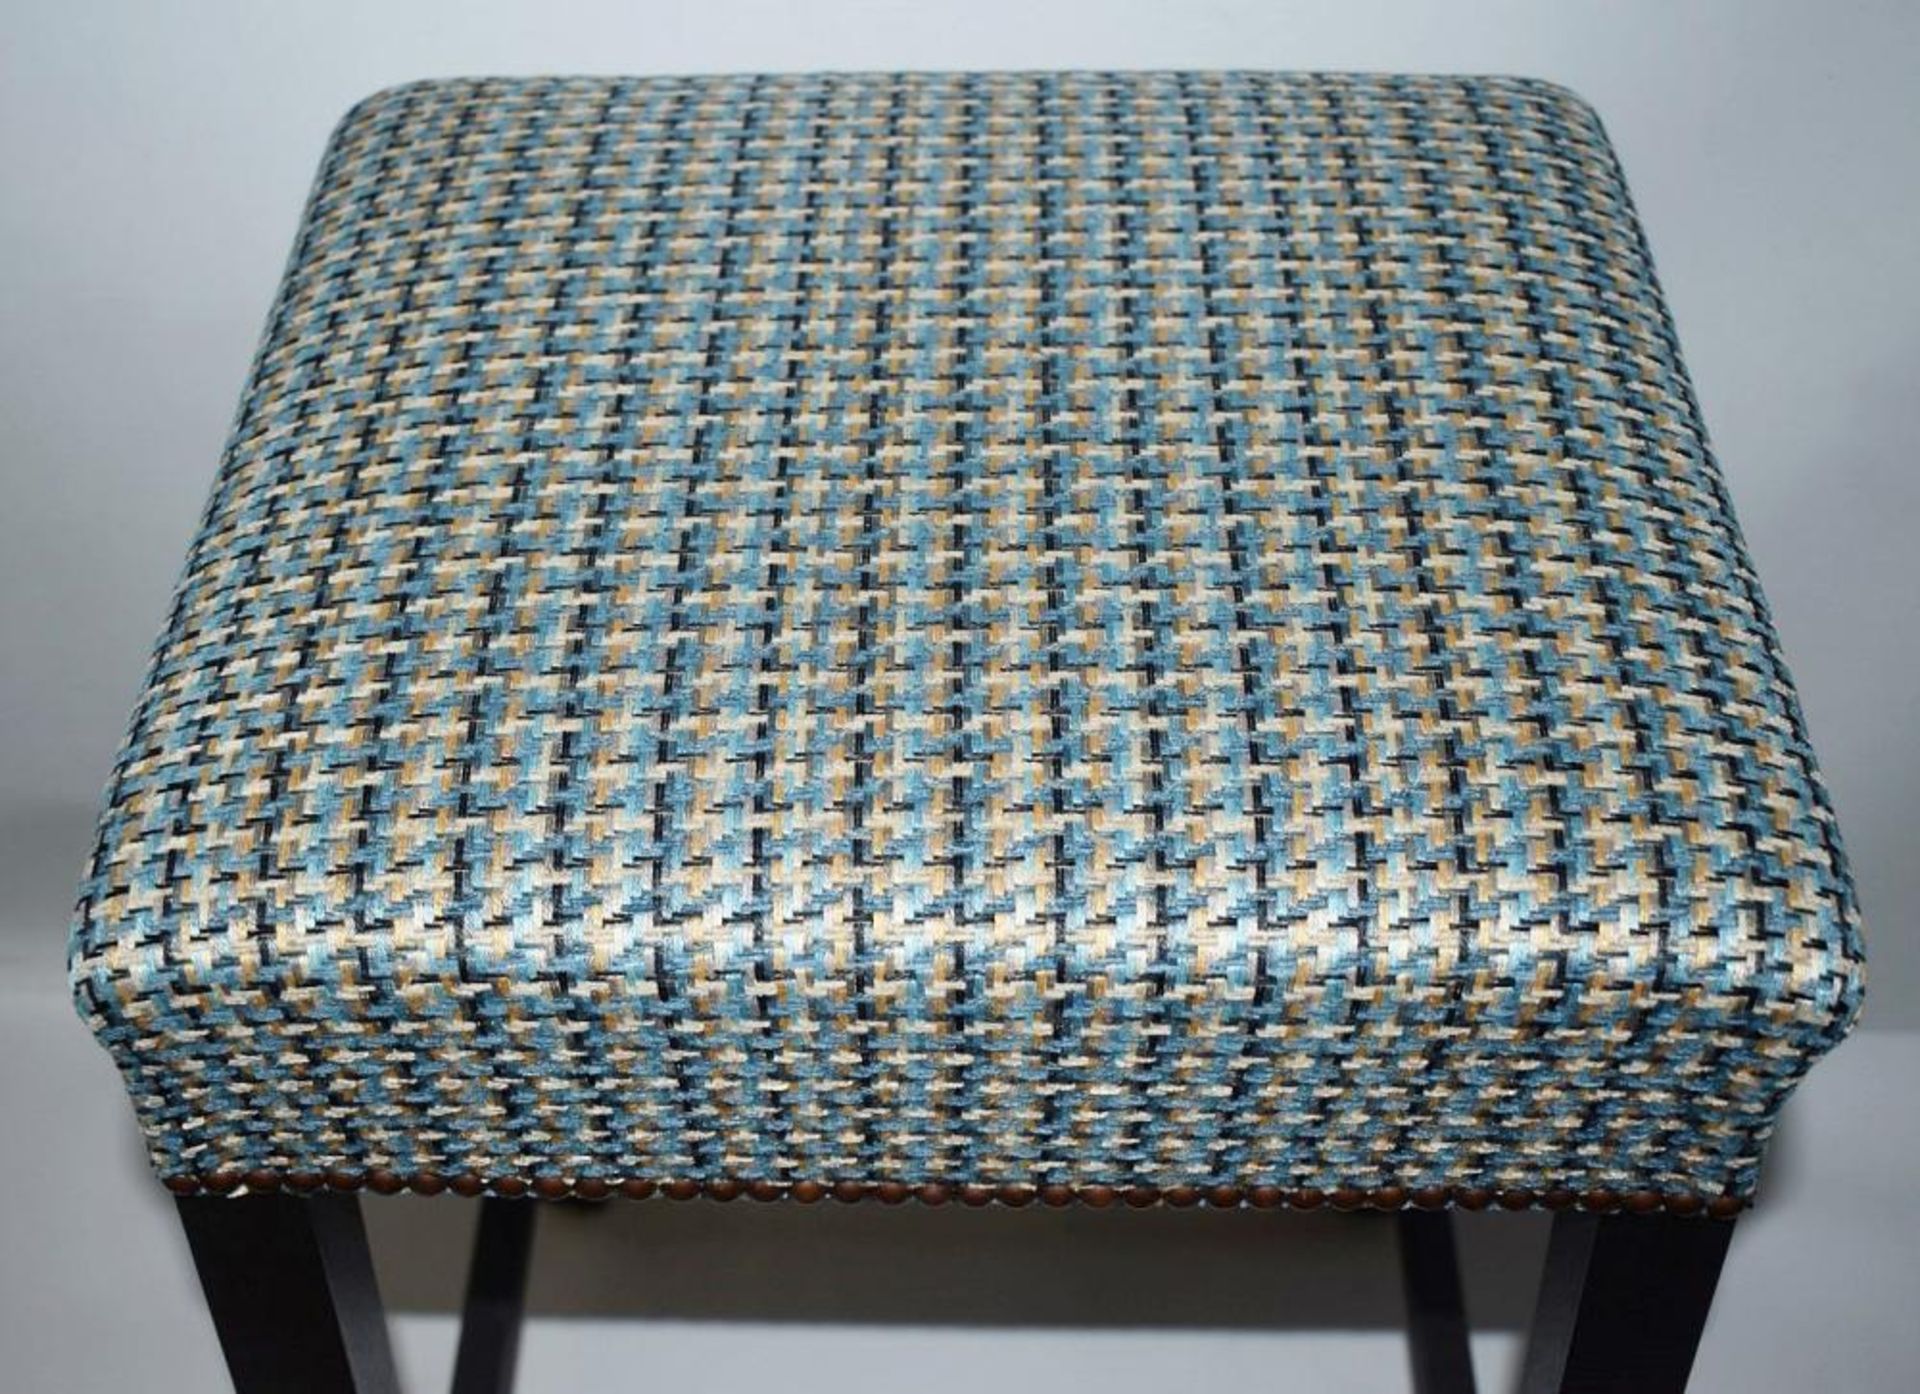 1 x Contemporary Bar Stool Upholstered In A Chic Designer Fabric - Recently Removed From A Famous De